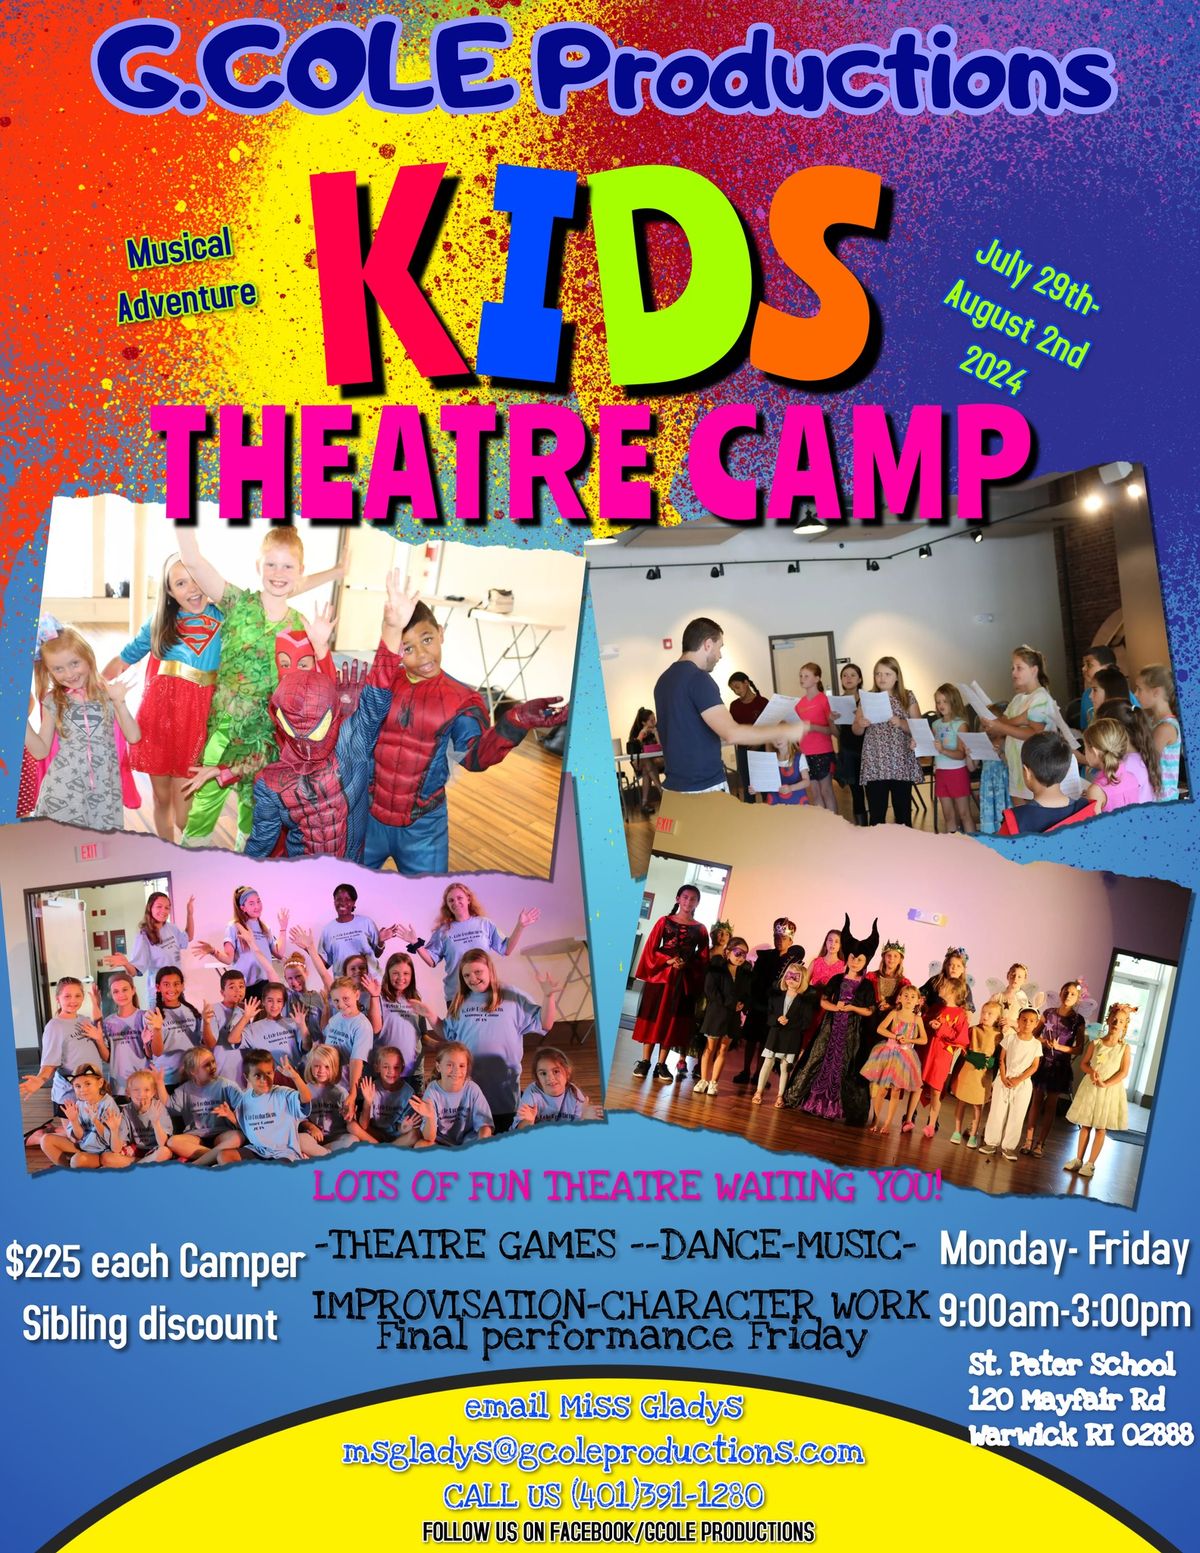 Musical Theatre Camp with G. COLE Productions